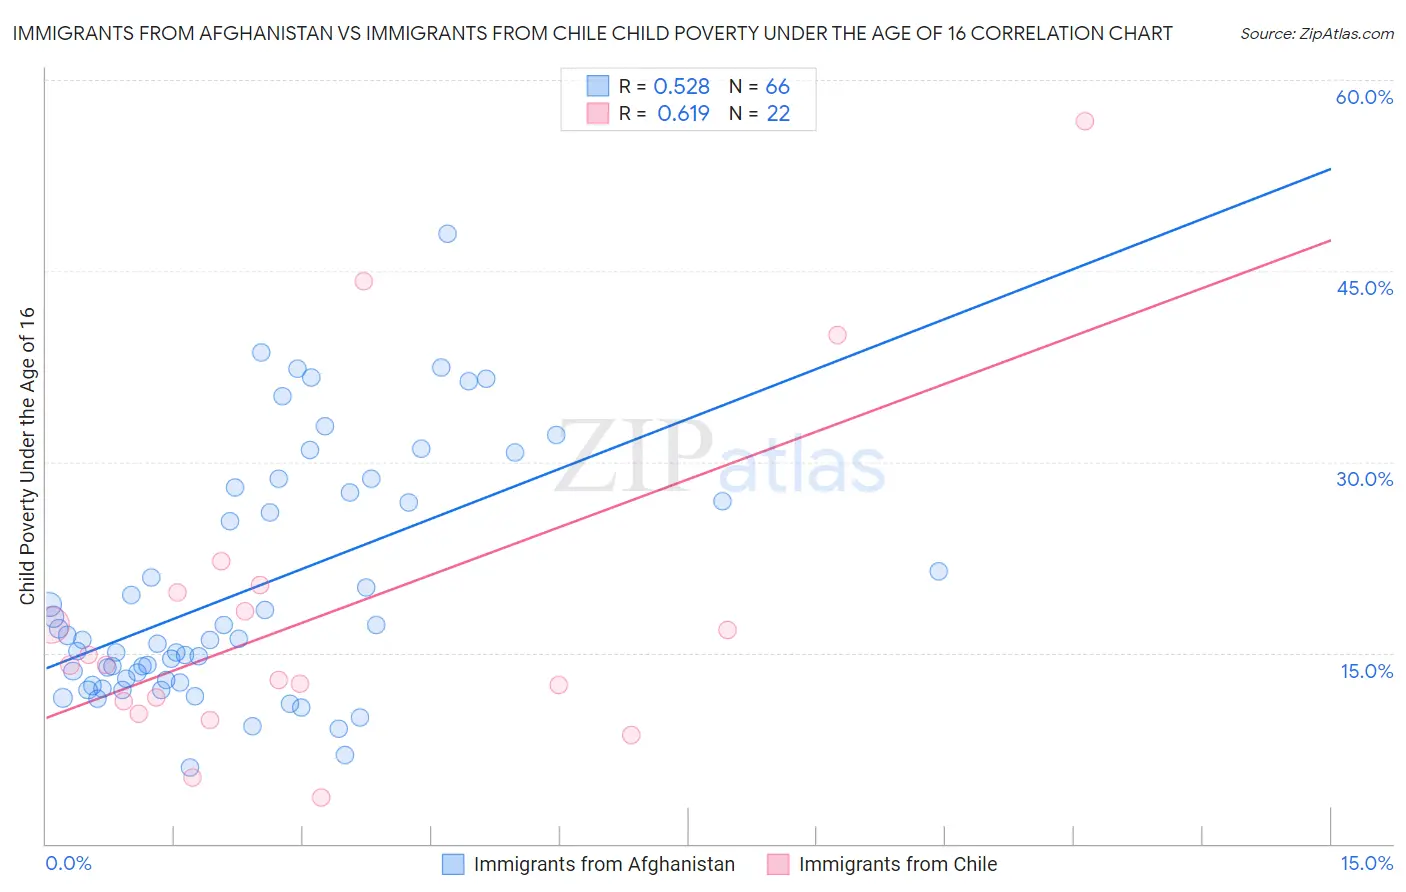 Immigrants from Afghanistan vs Immigrants from Chile Child Poverty Under the Age of 16